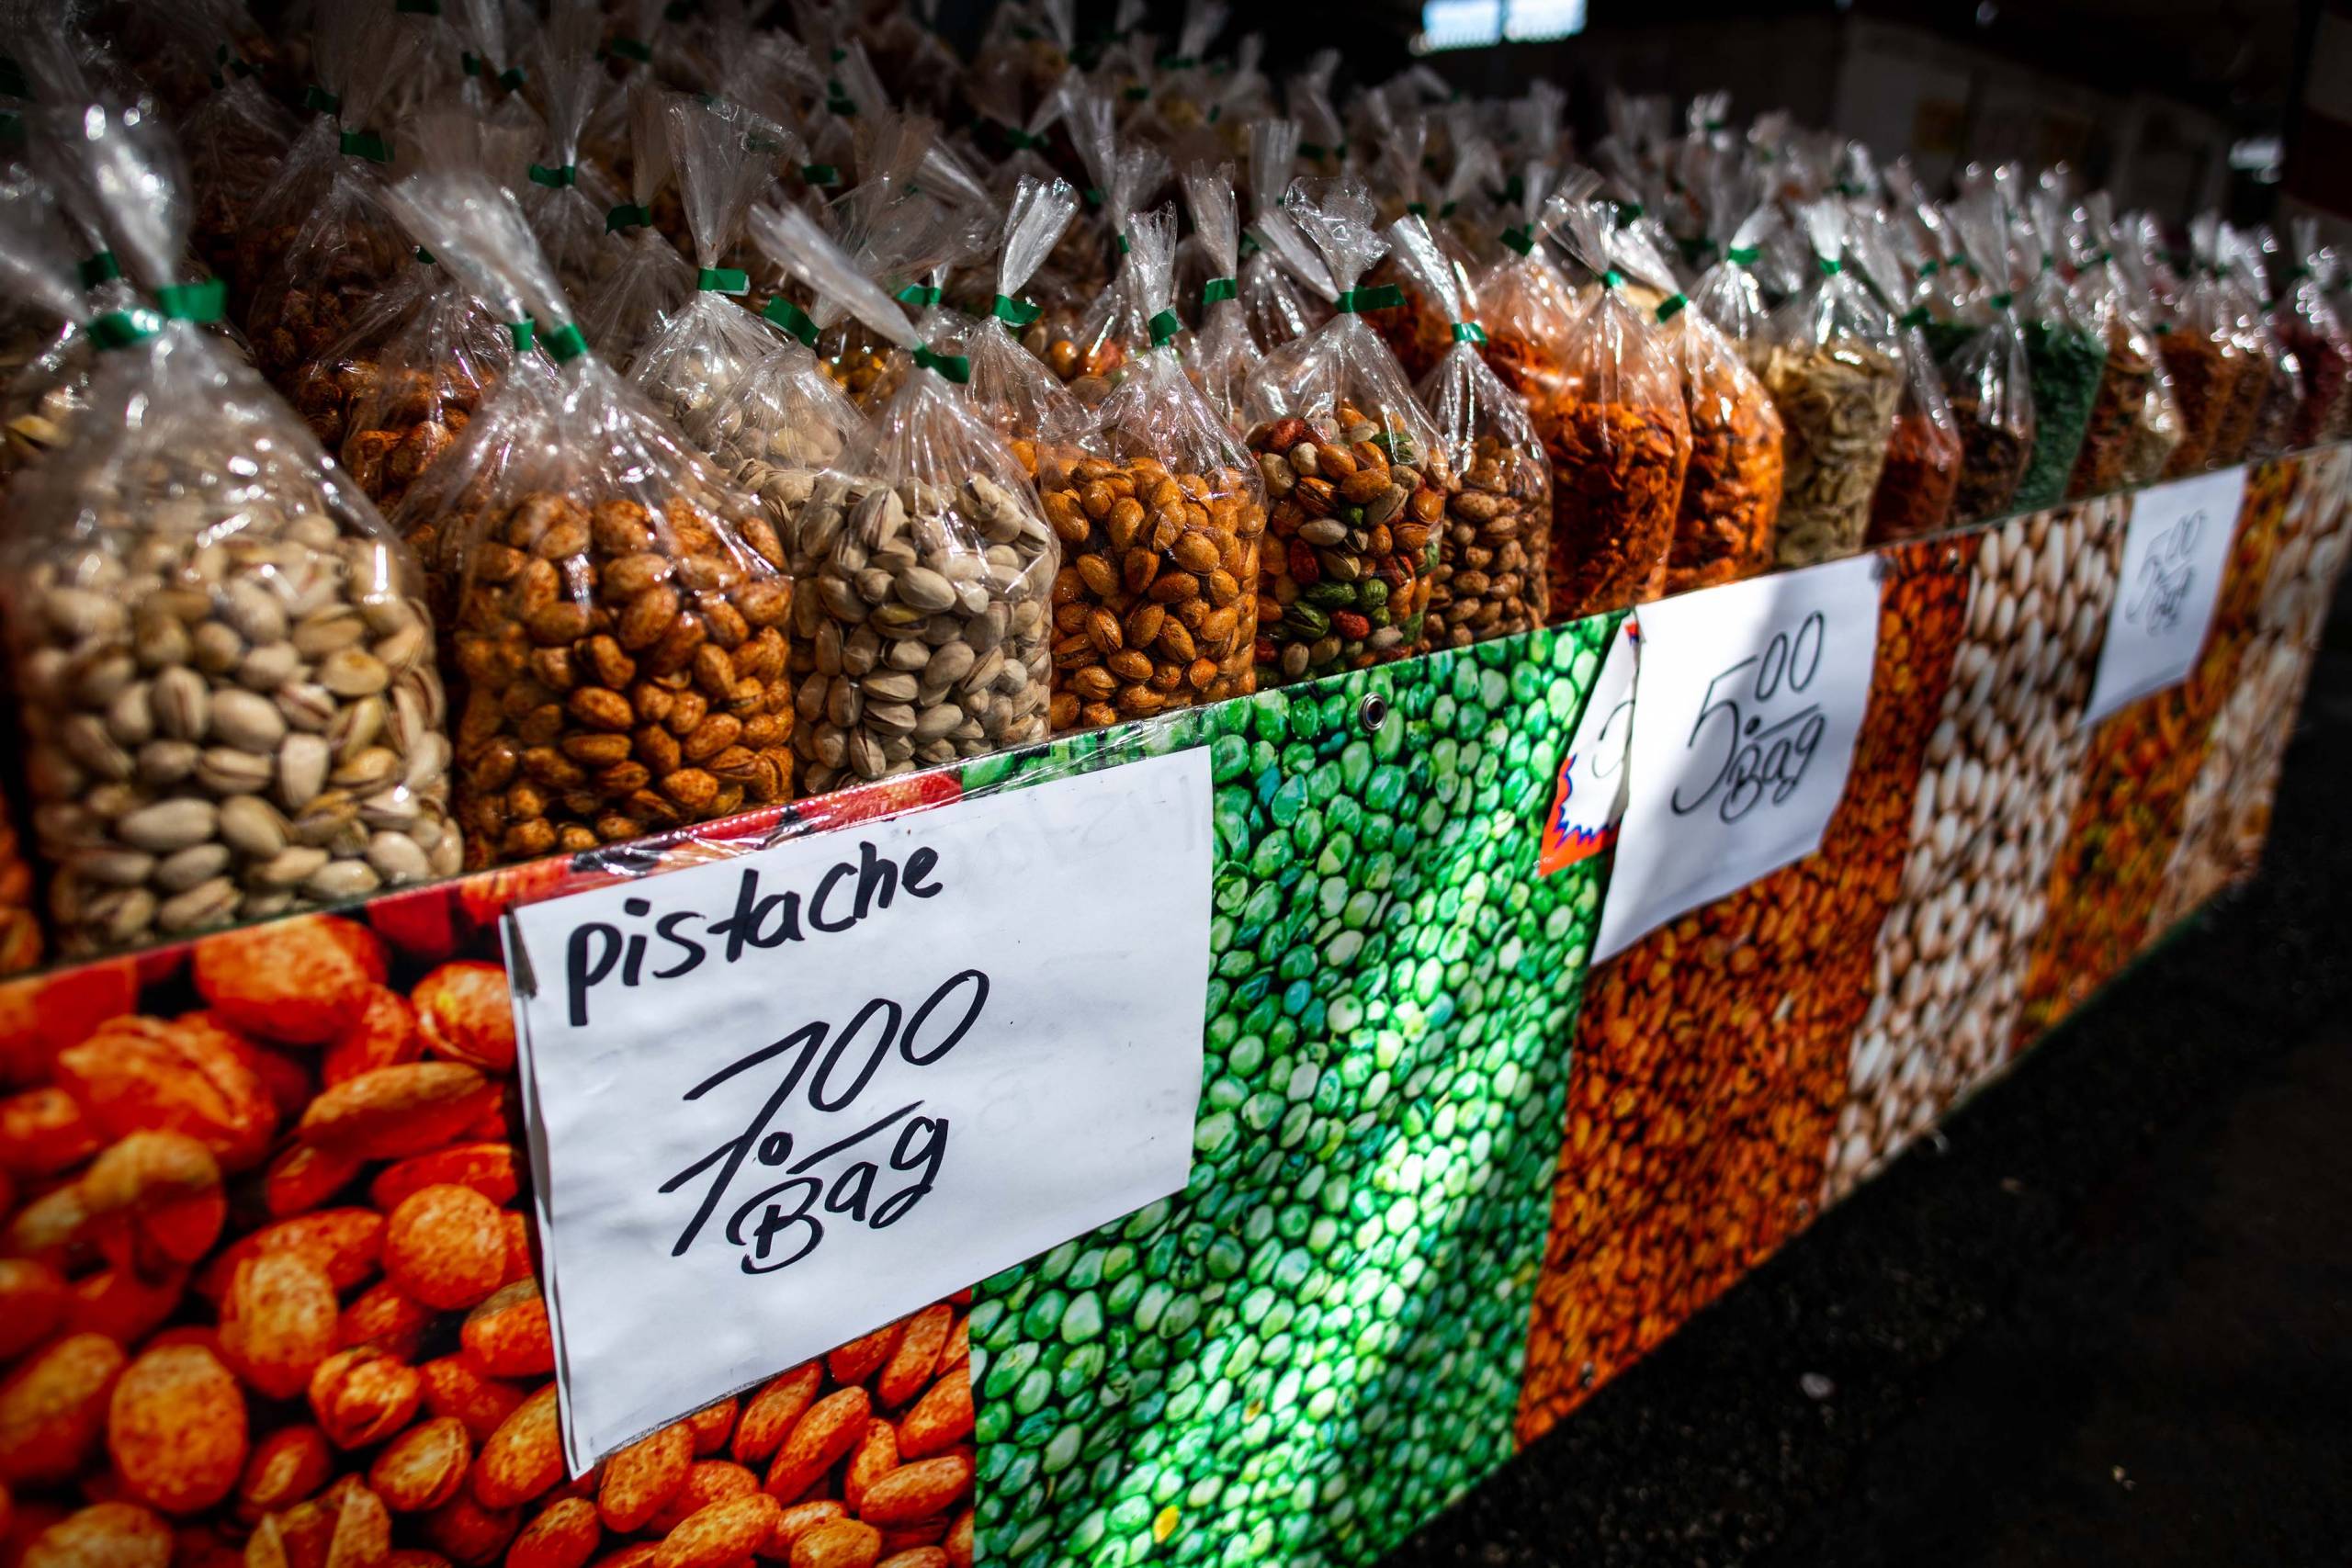 Bags of flavored pistachios of all different colors, displayed at an outdoor market stand.